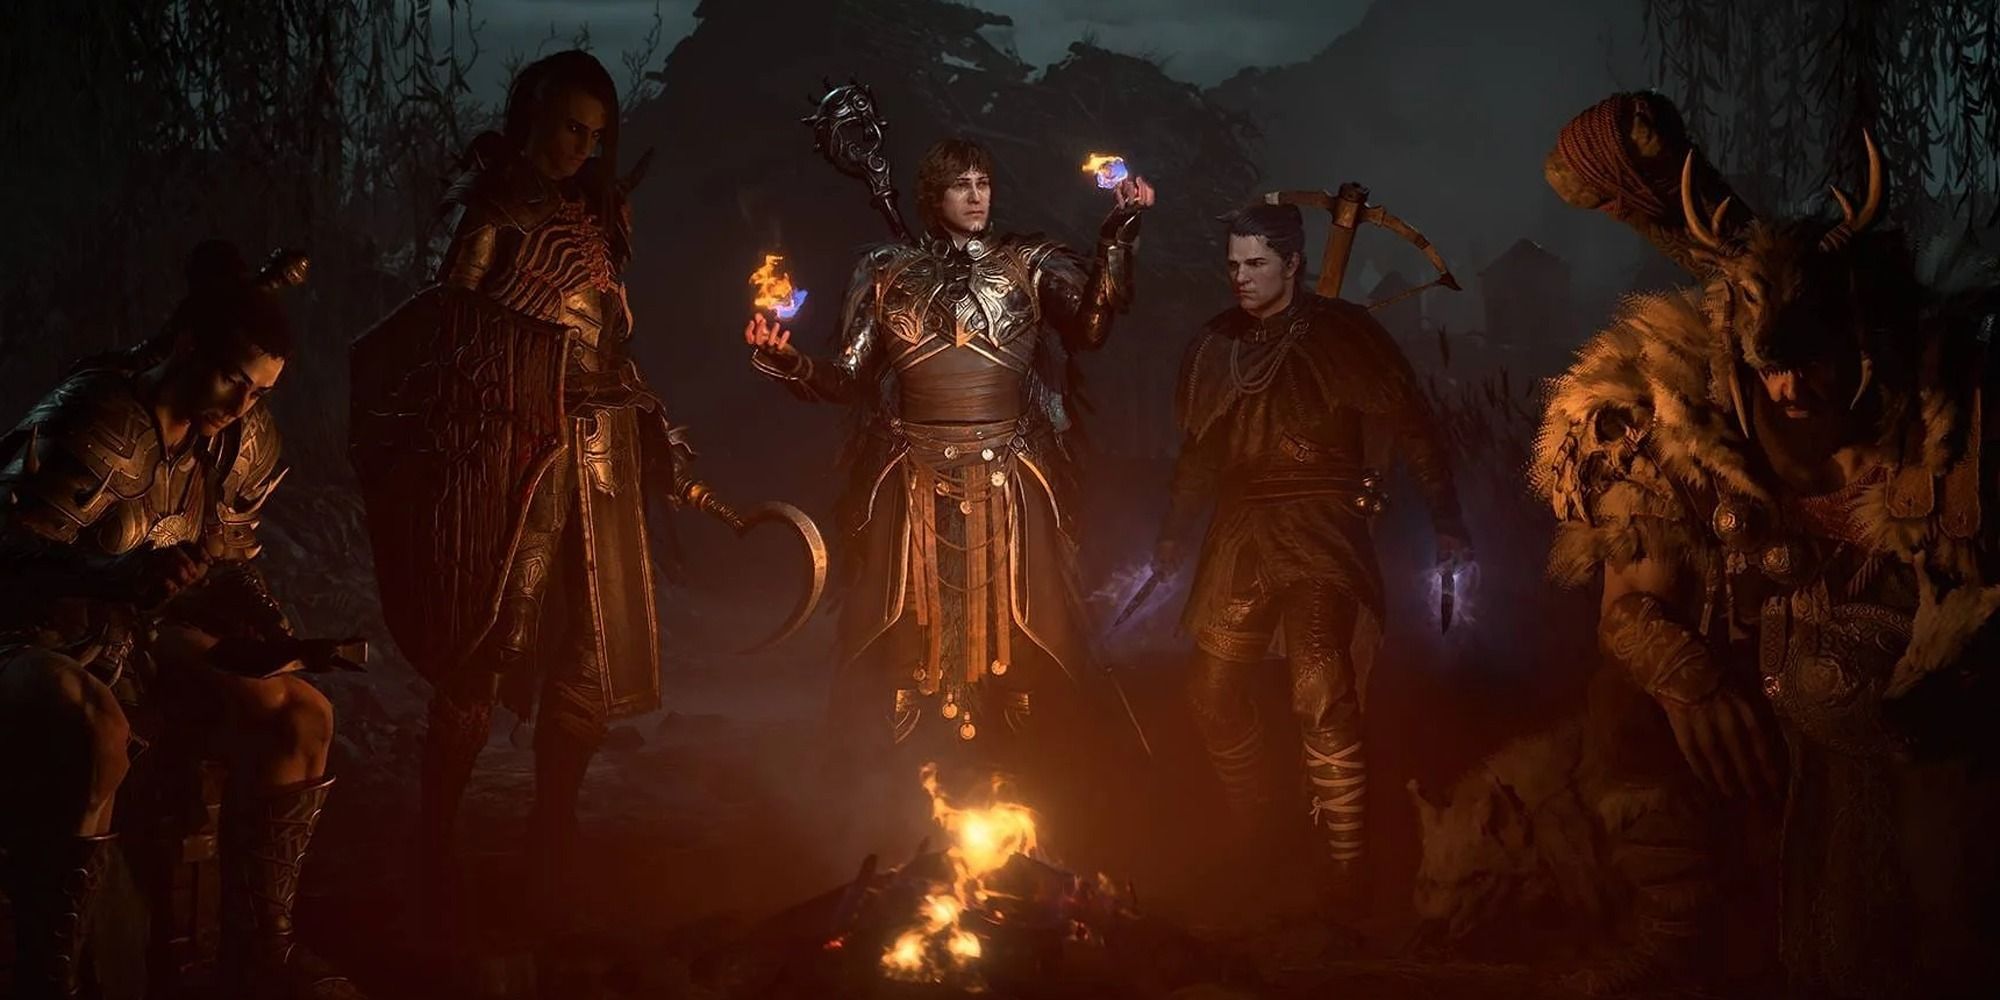 Diablo 4 Will Receive New Story Content Every 3 Months, But People Are Skeptical